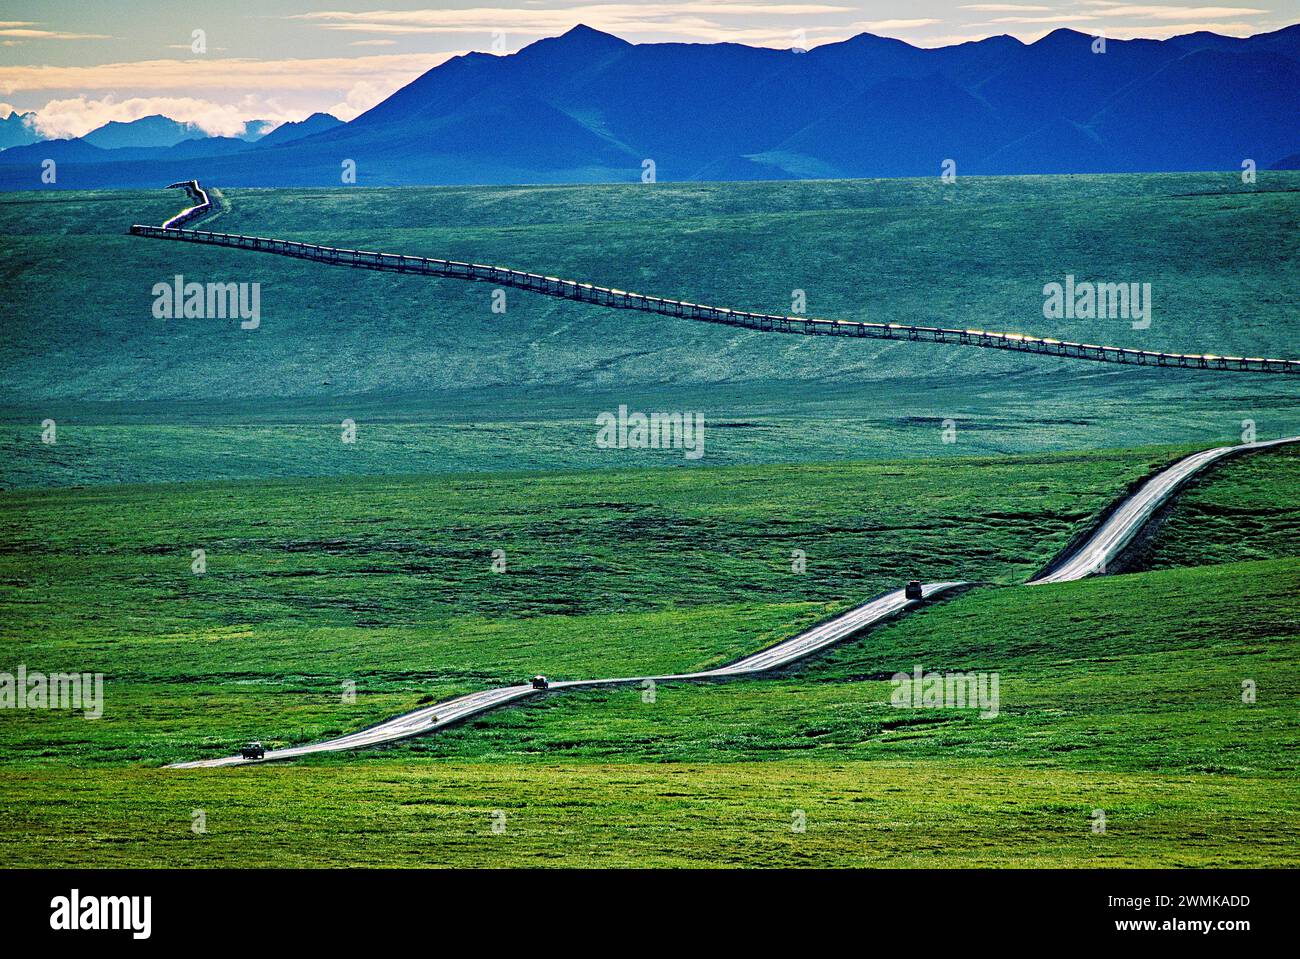 Three vehicles on the Dalton Highway, traverse rolling hills over the green tundra in summer, following the Trans-Alaska Pipeline in the background... Stock Photo